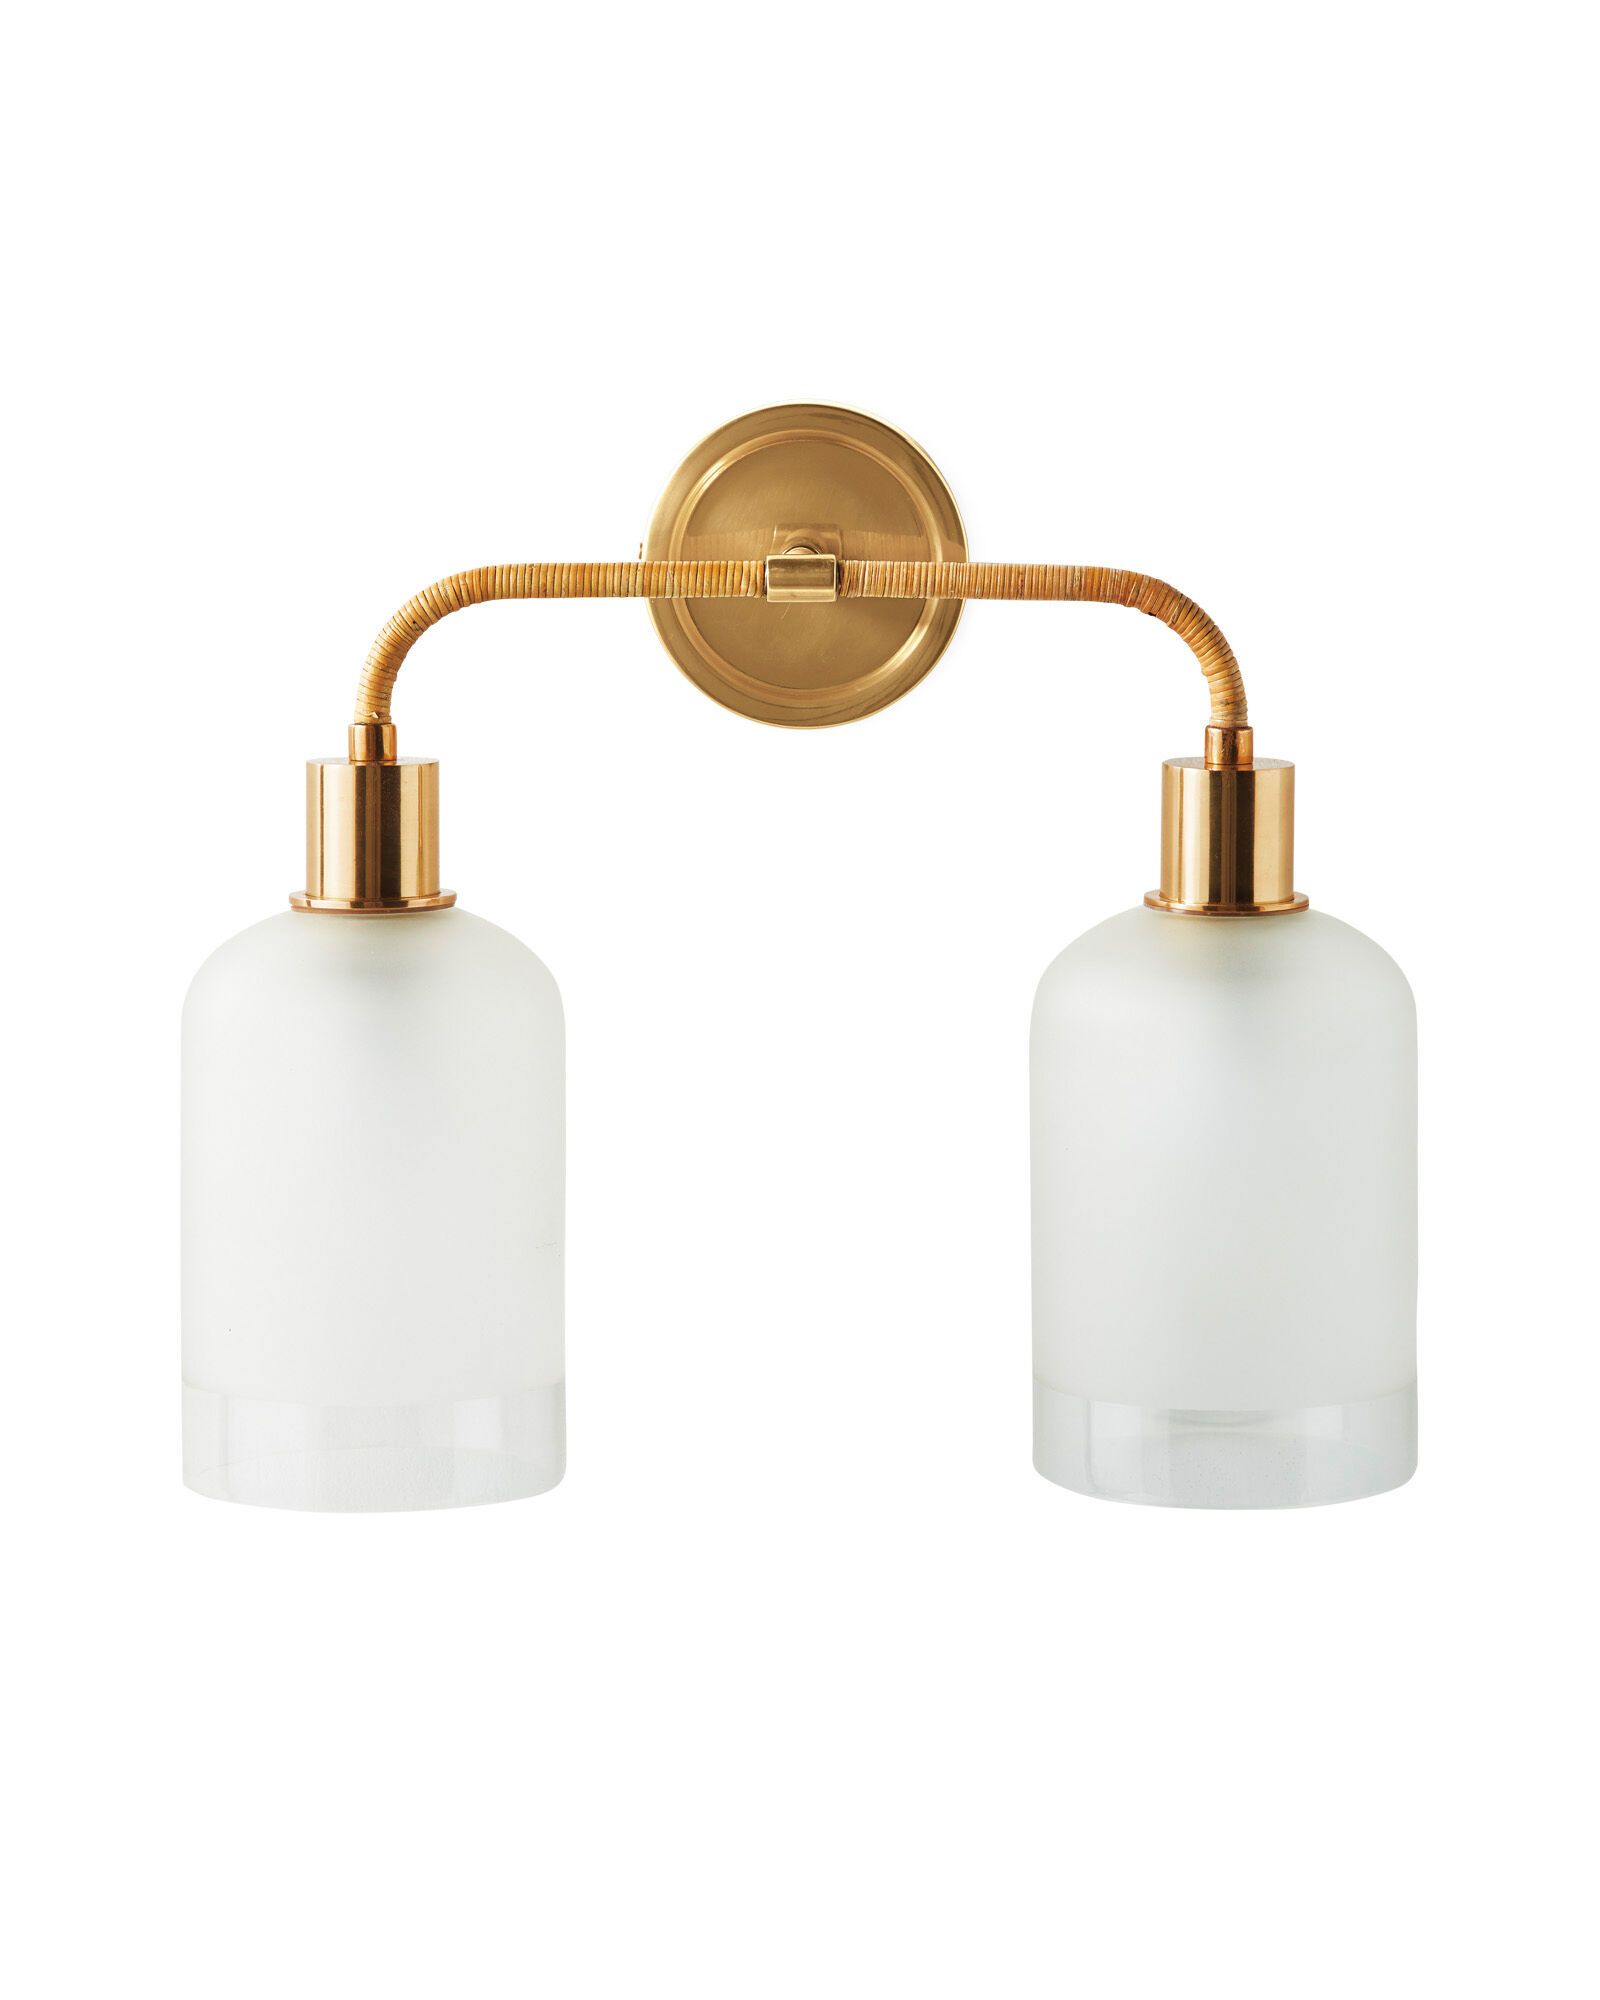 Westbrooke Double Sconce | Serena and Lily